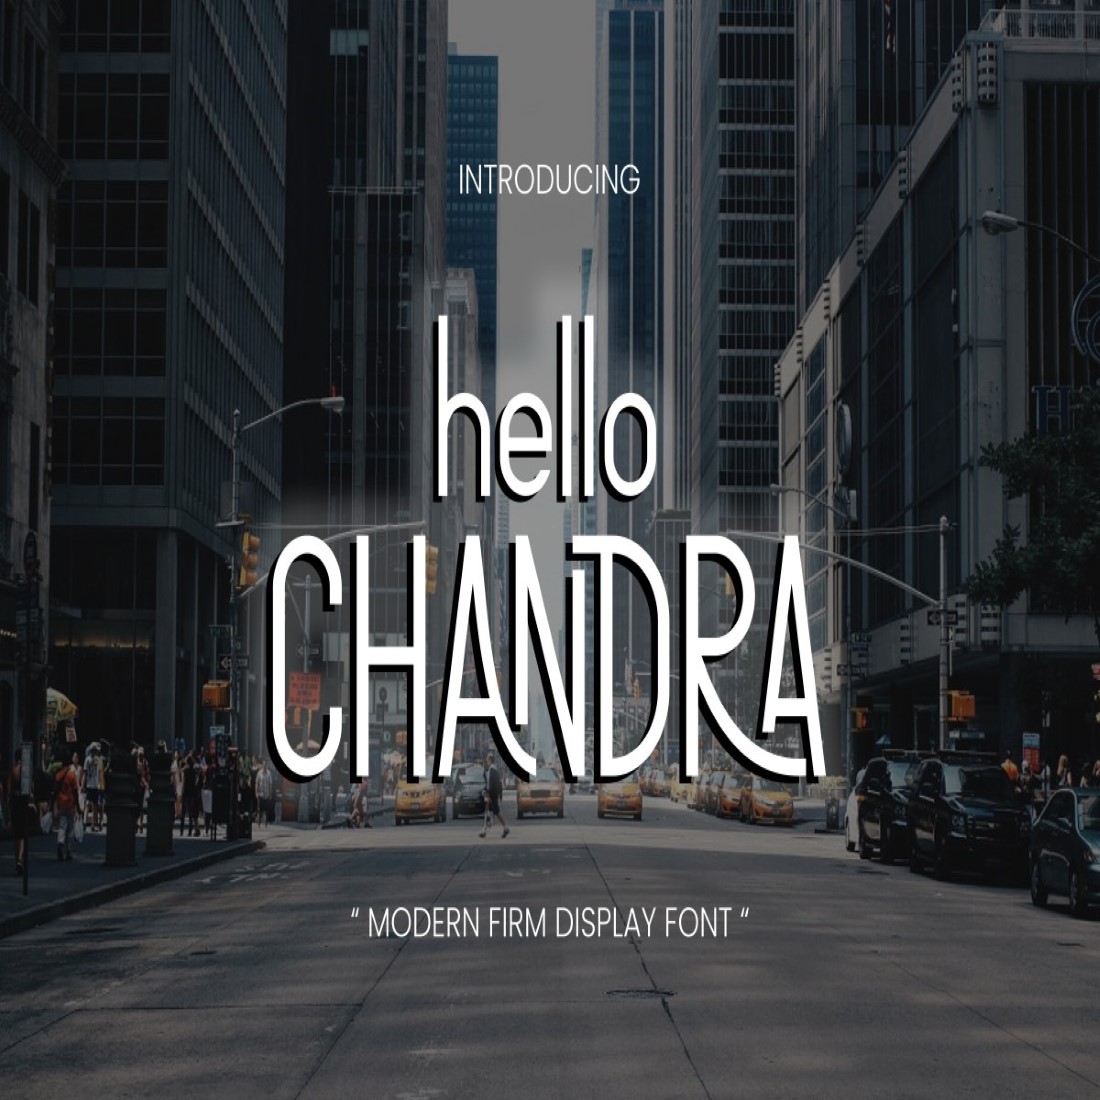 Hello Chandra - Modern Firm Display Font cover image.